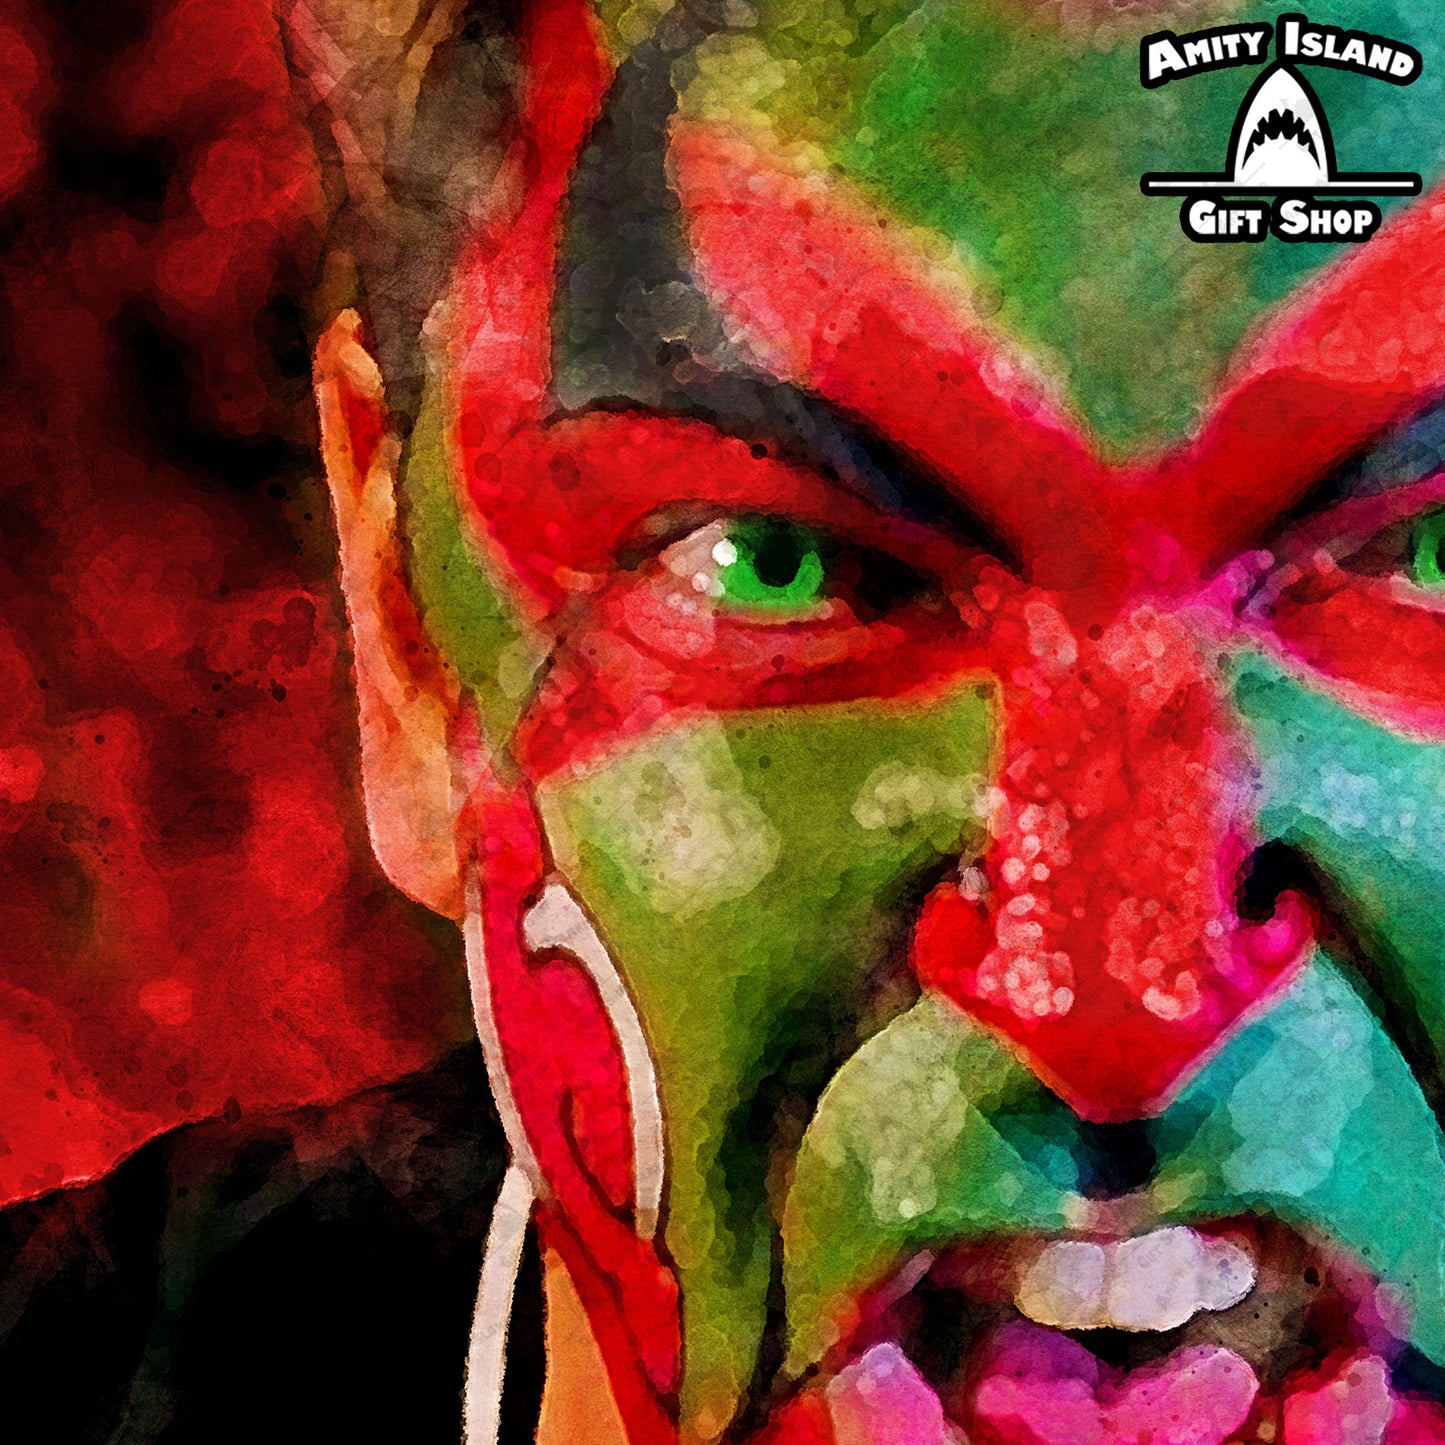 Support the Team - NJ Devils "Puddy in Face Paint" Art Print